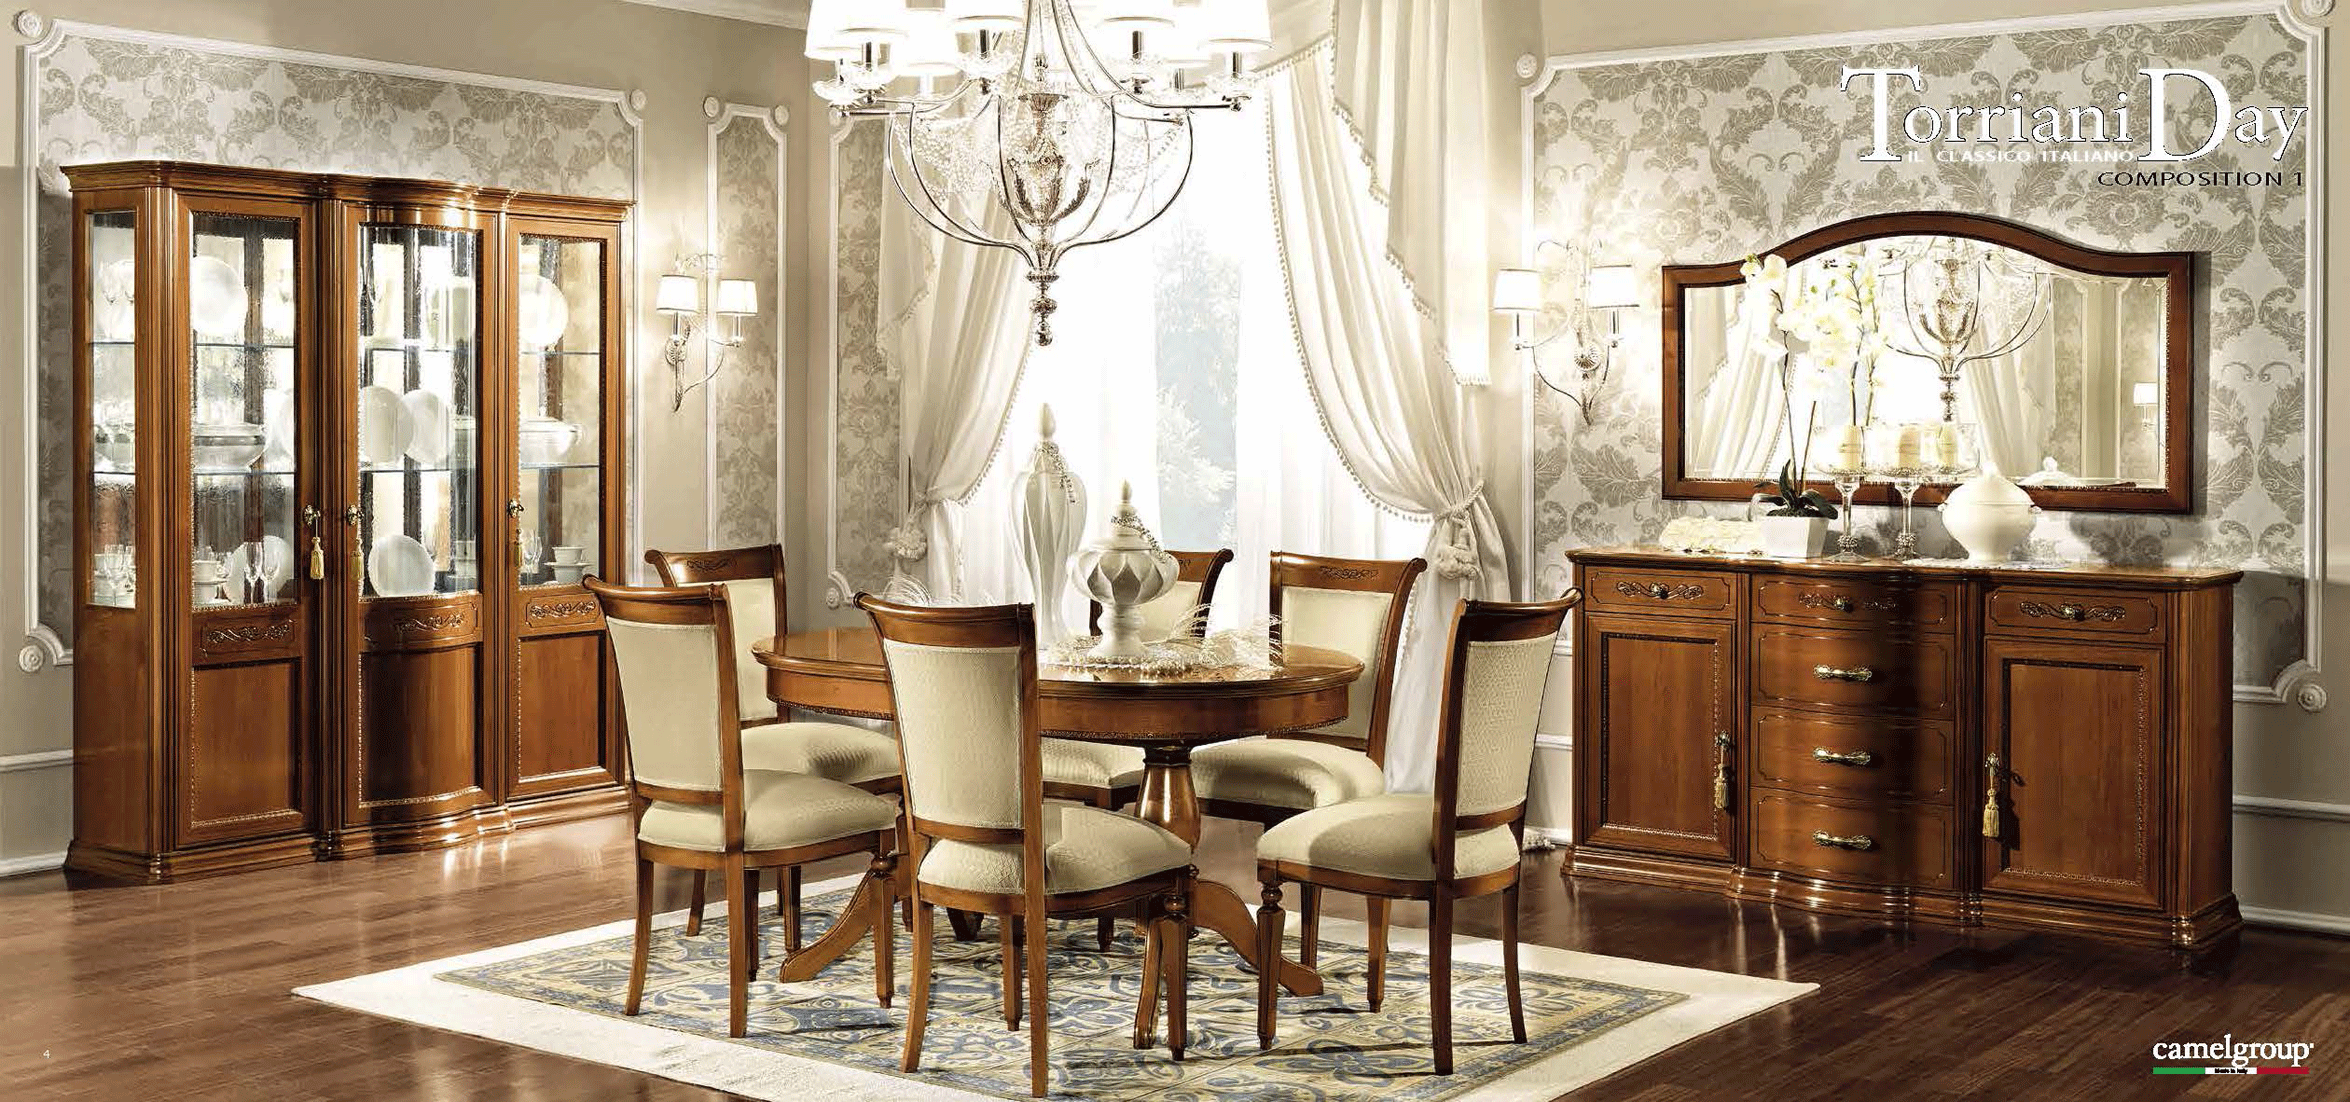 Clearance Dining Room Torriani Day